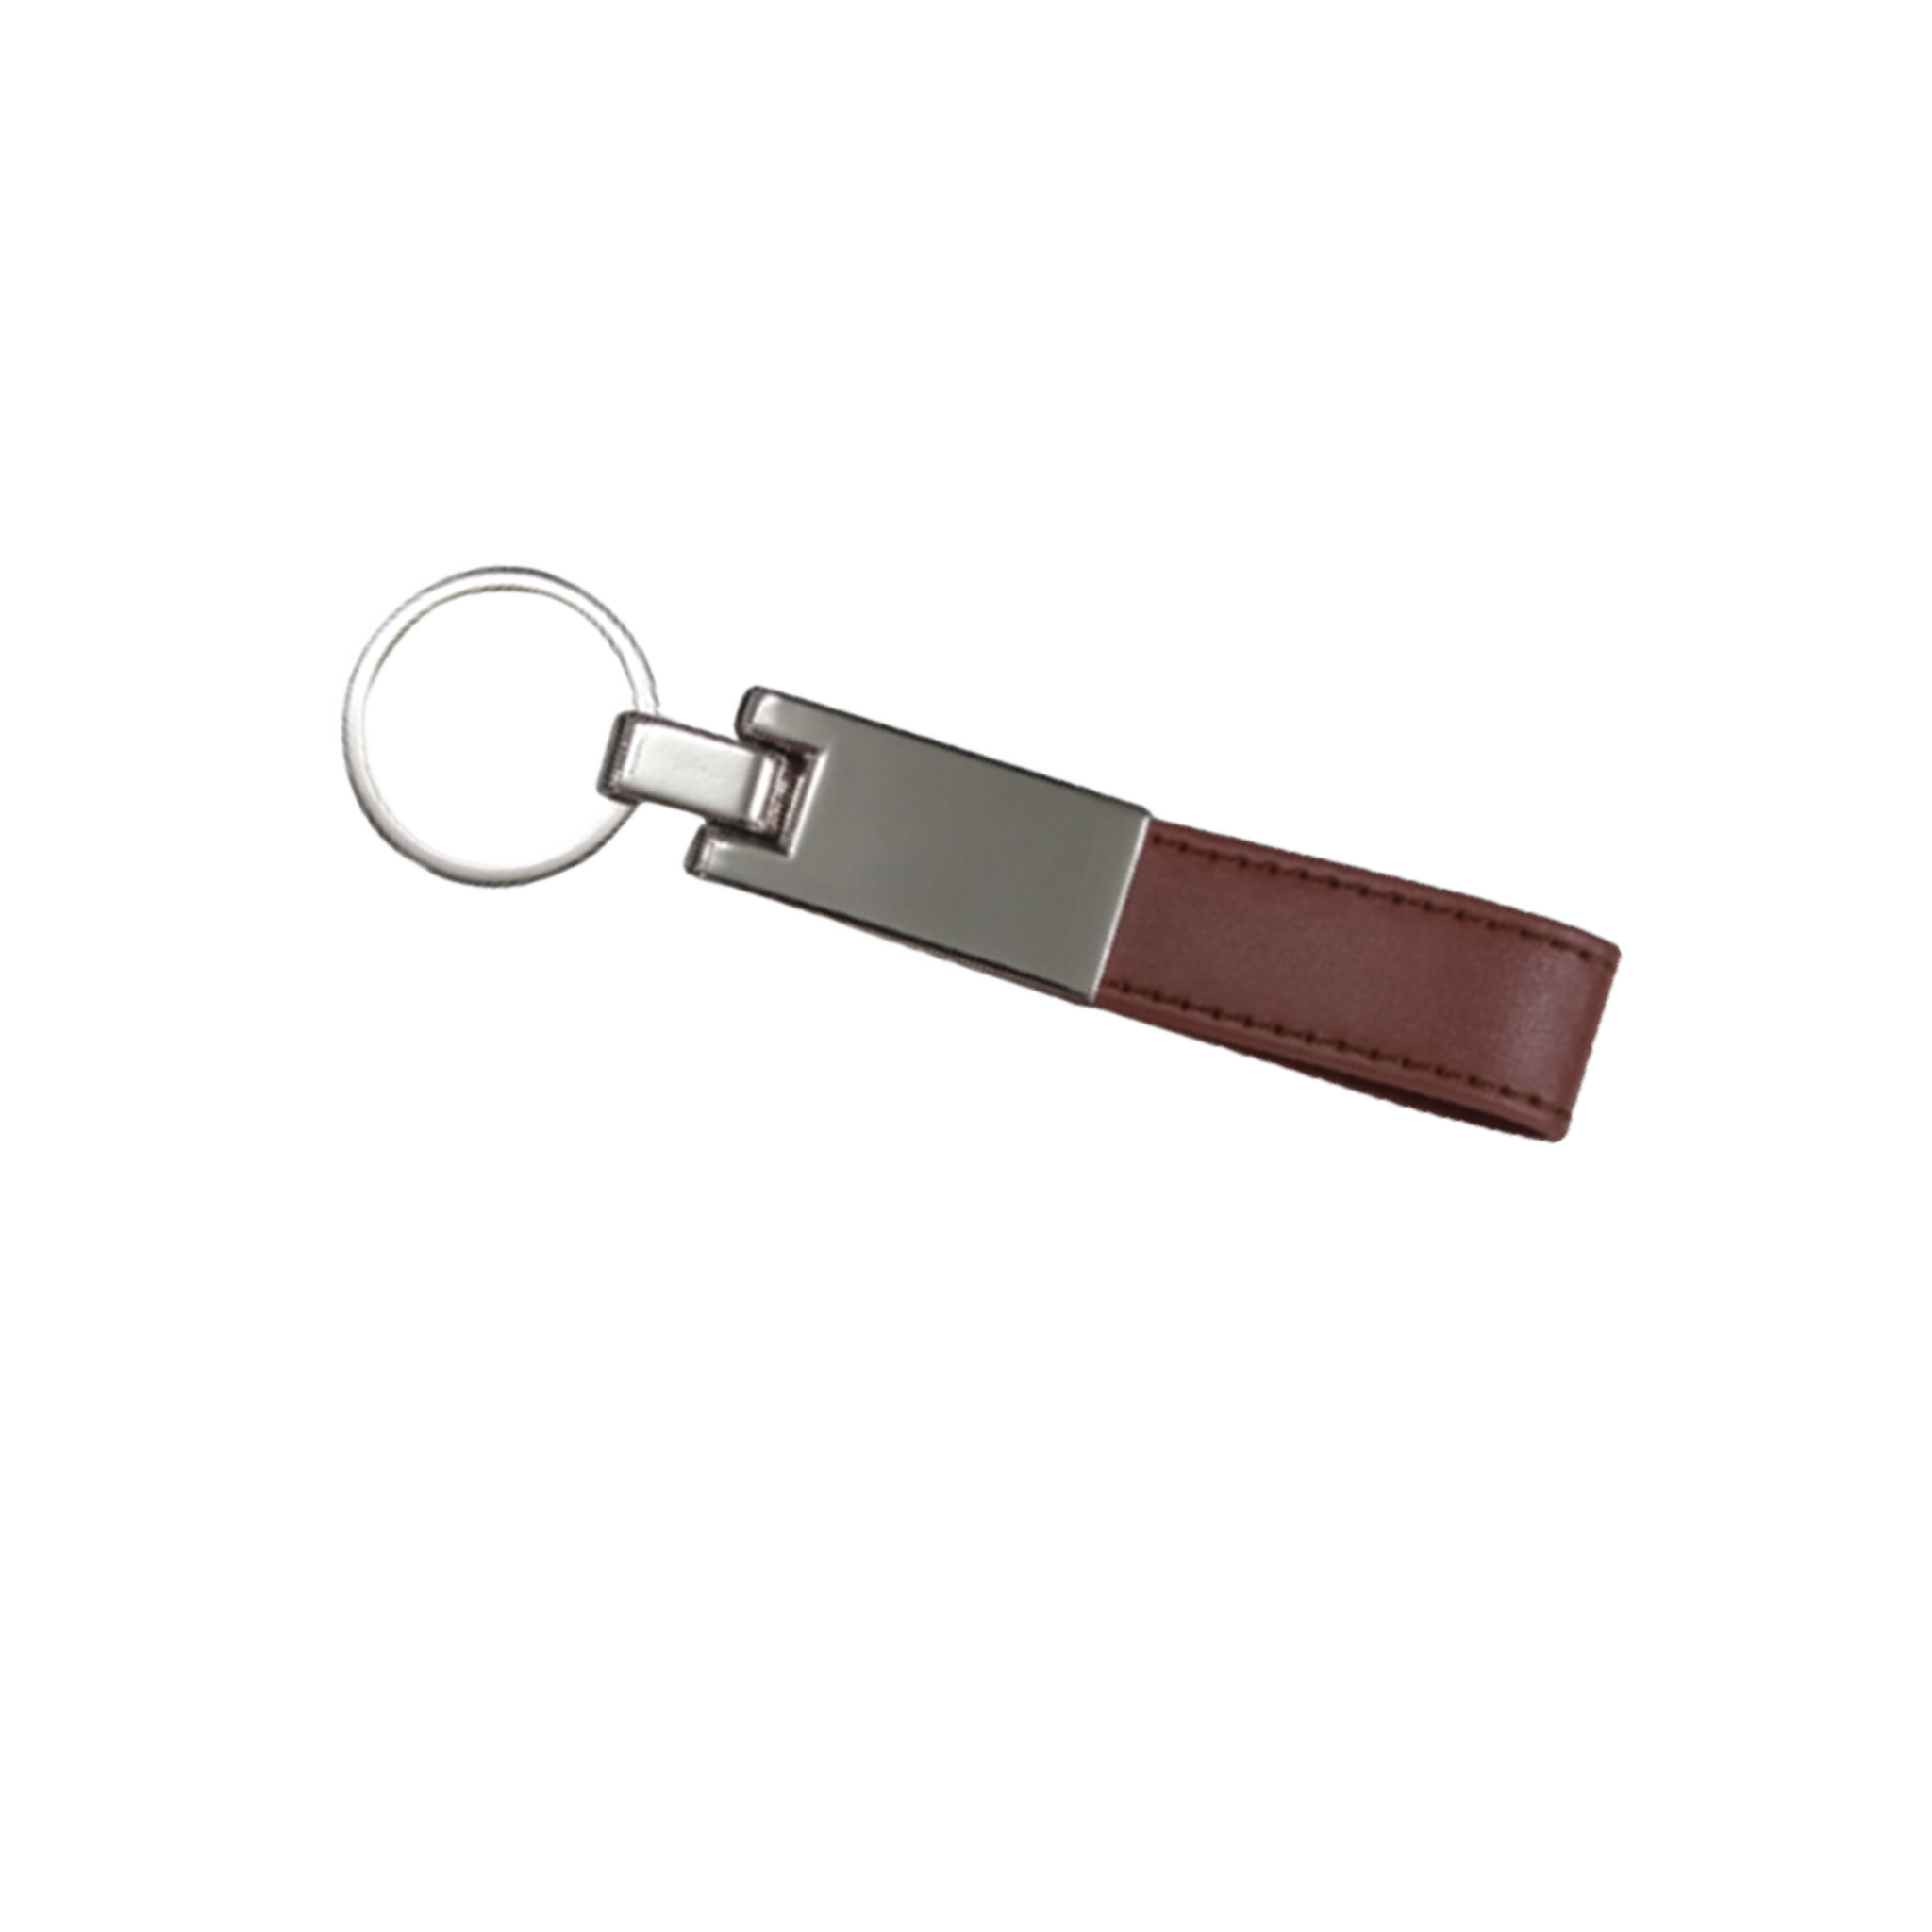 Metallic Leather Key Chain - 200 Pack - Brown